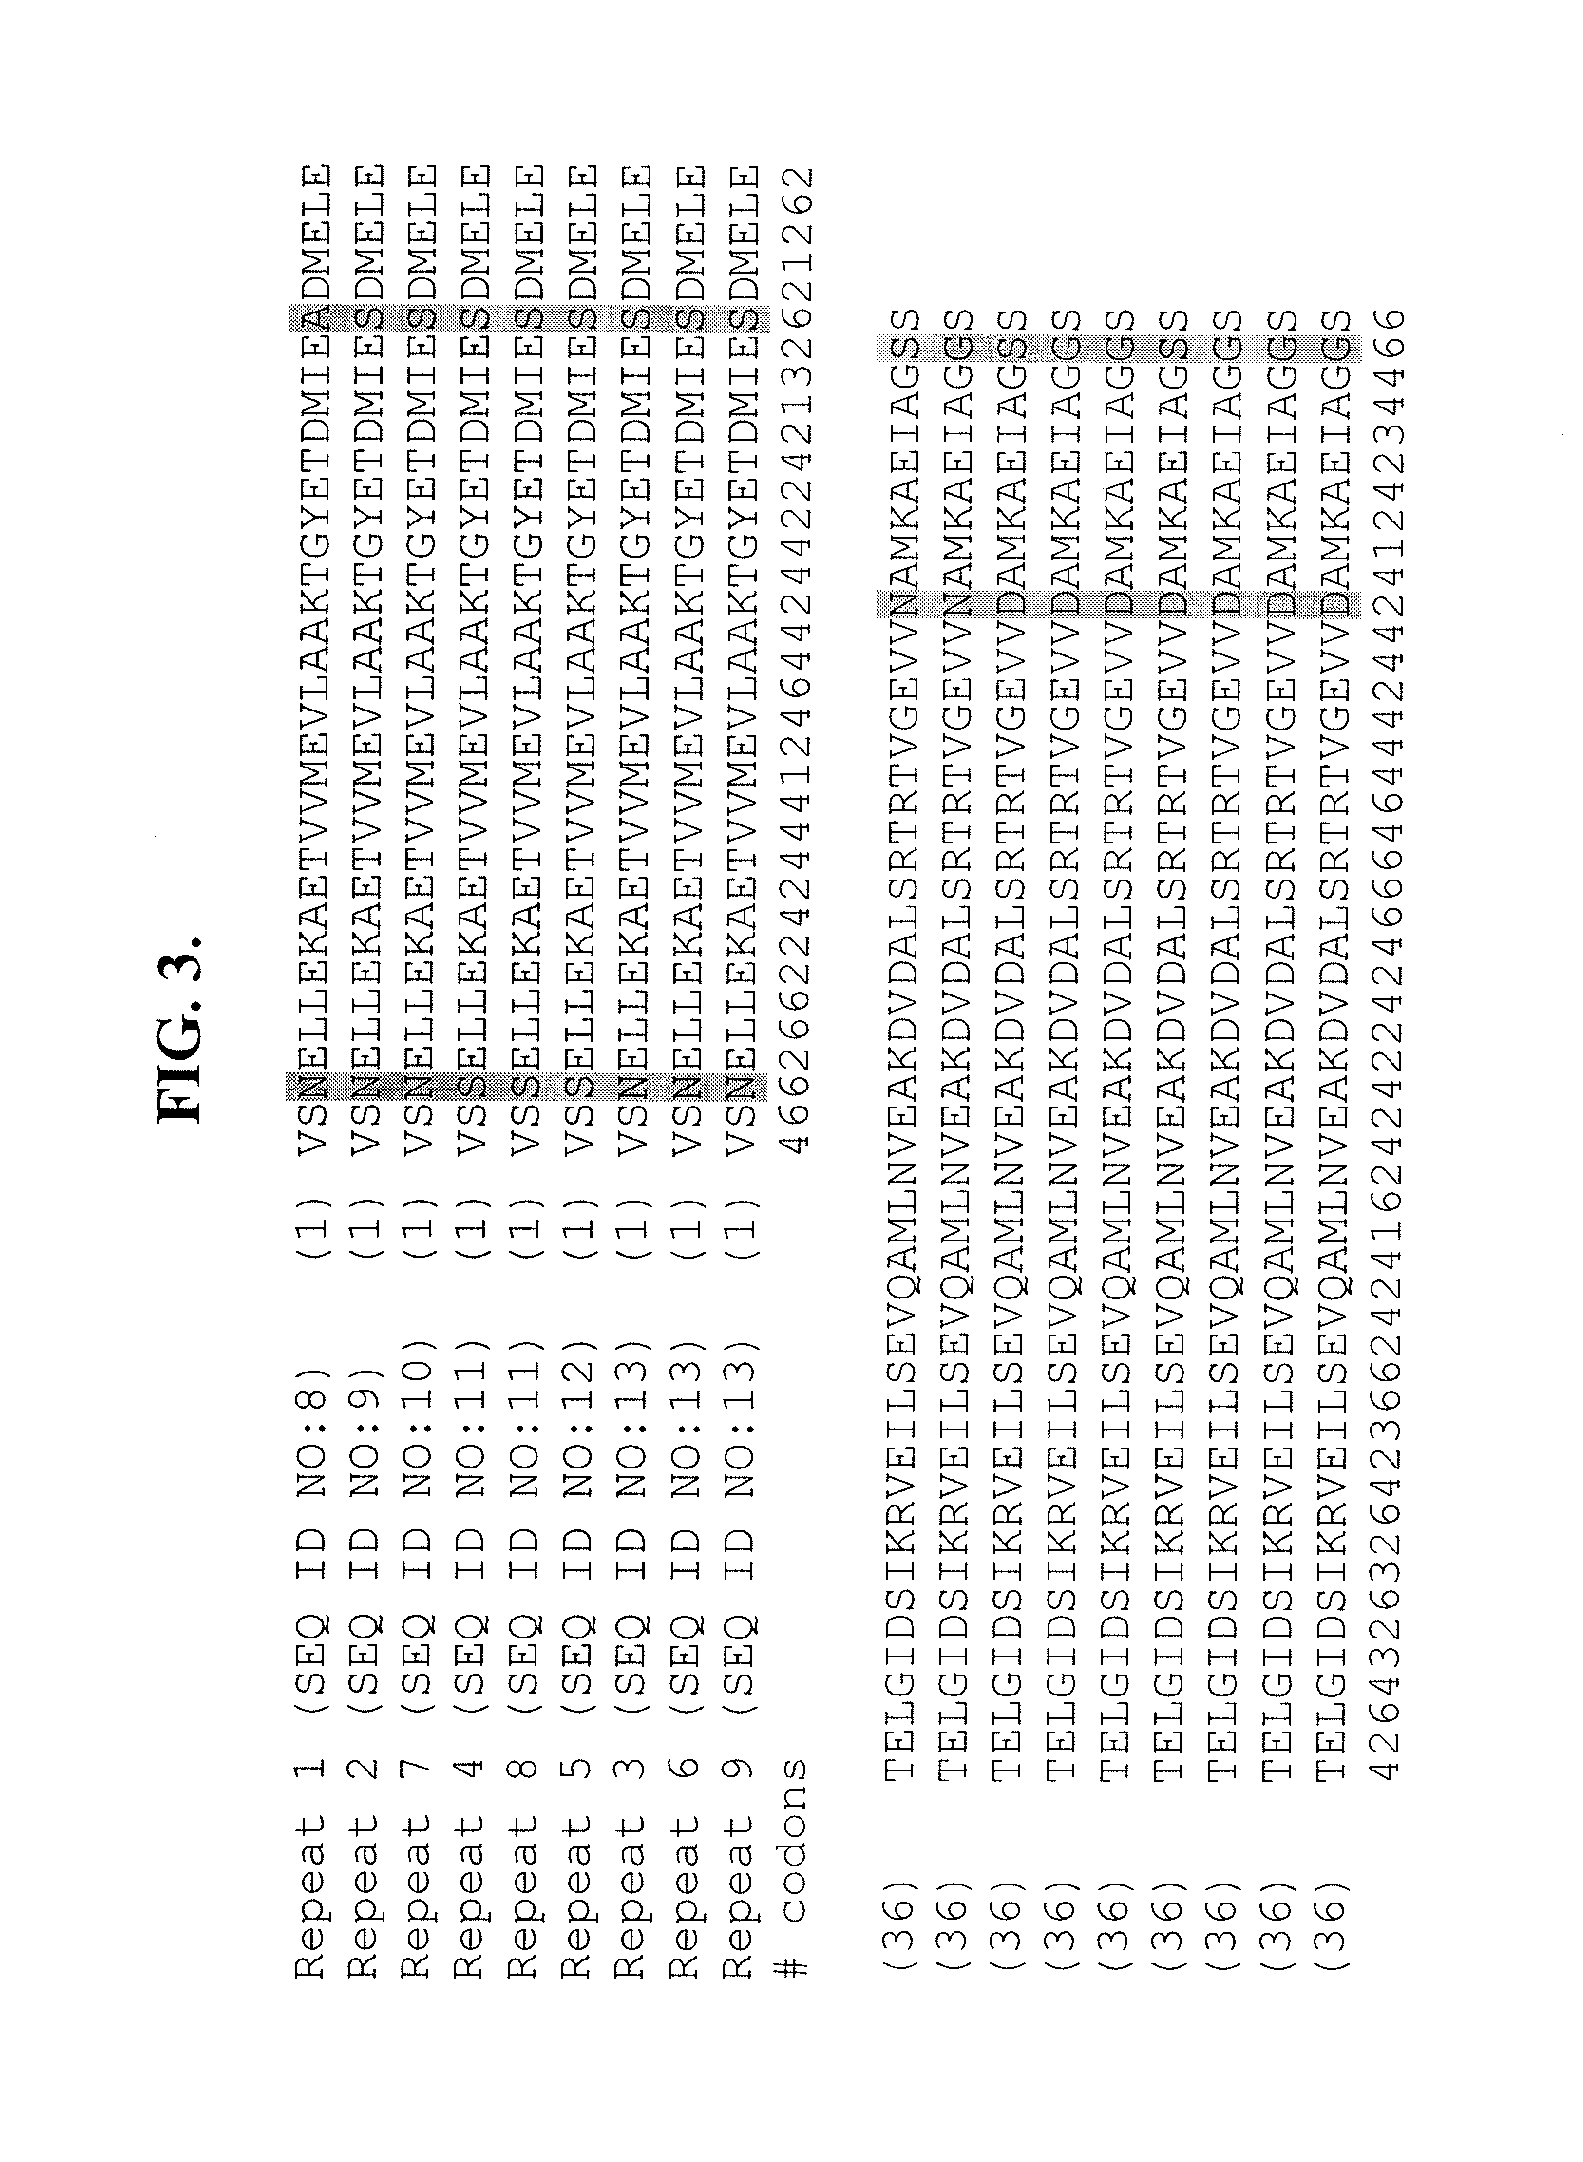 Process for designing diverged, codon-optimized large repeated DNA sequences